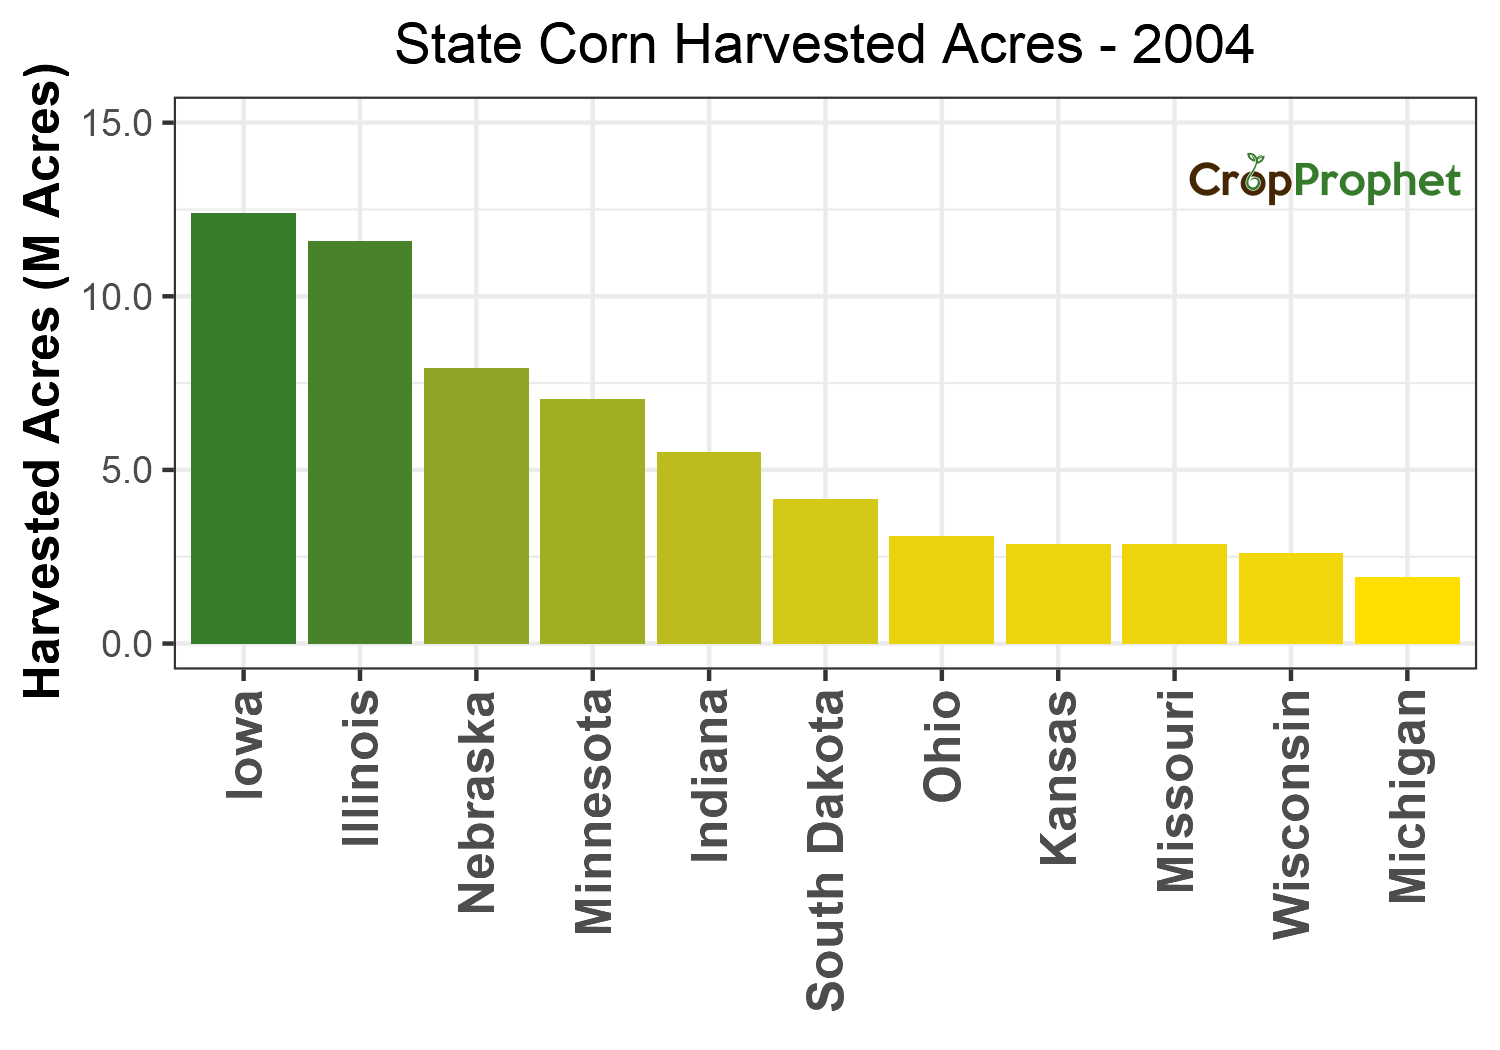 Corn Harvested Acres by State - 2004 Rankings